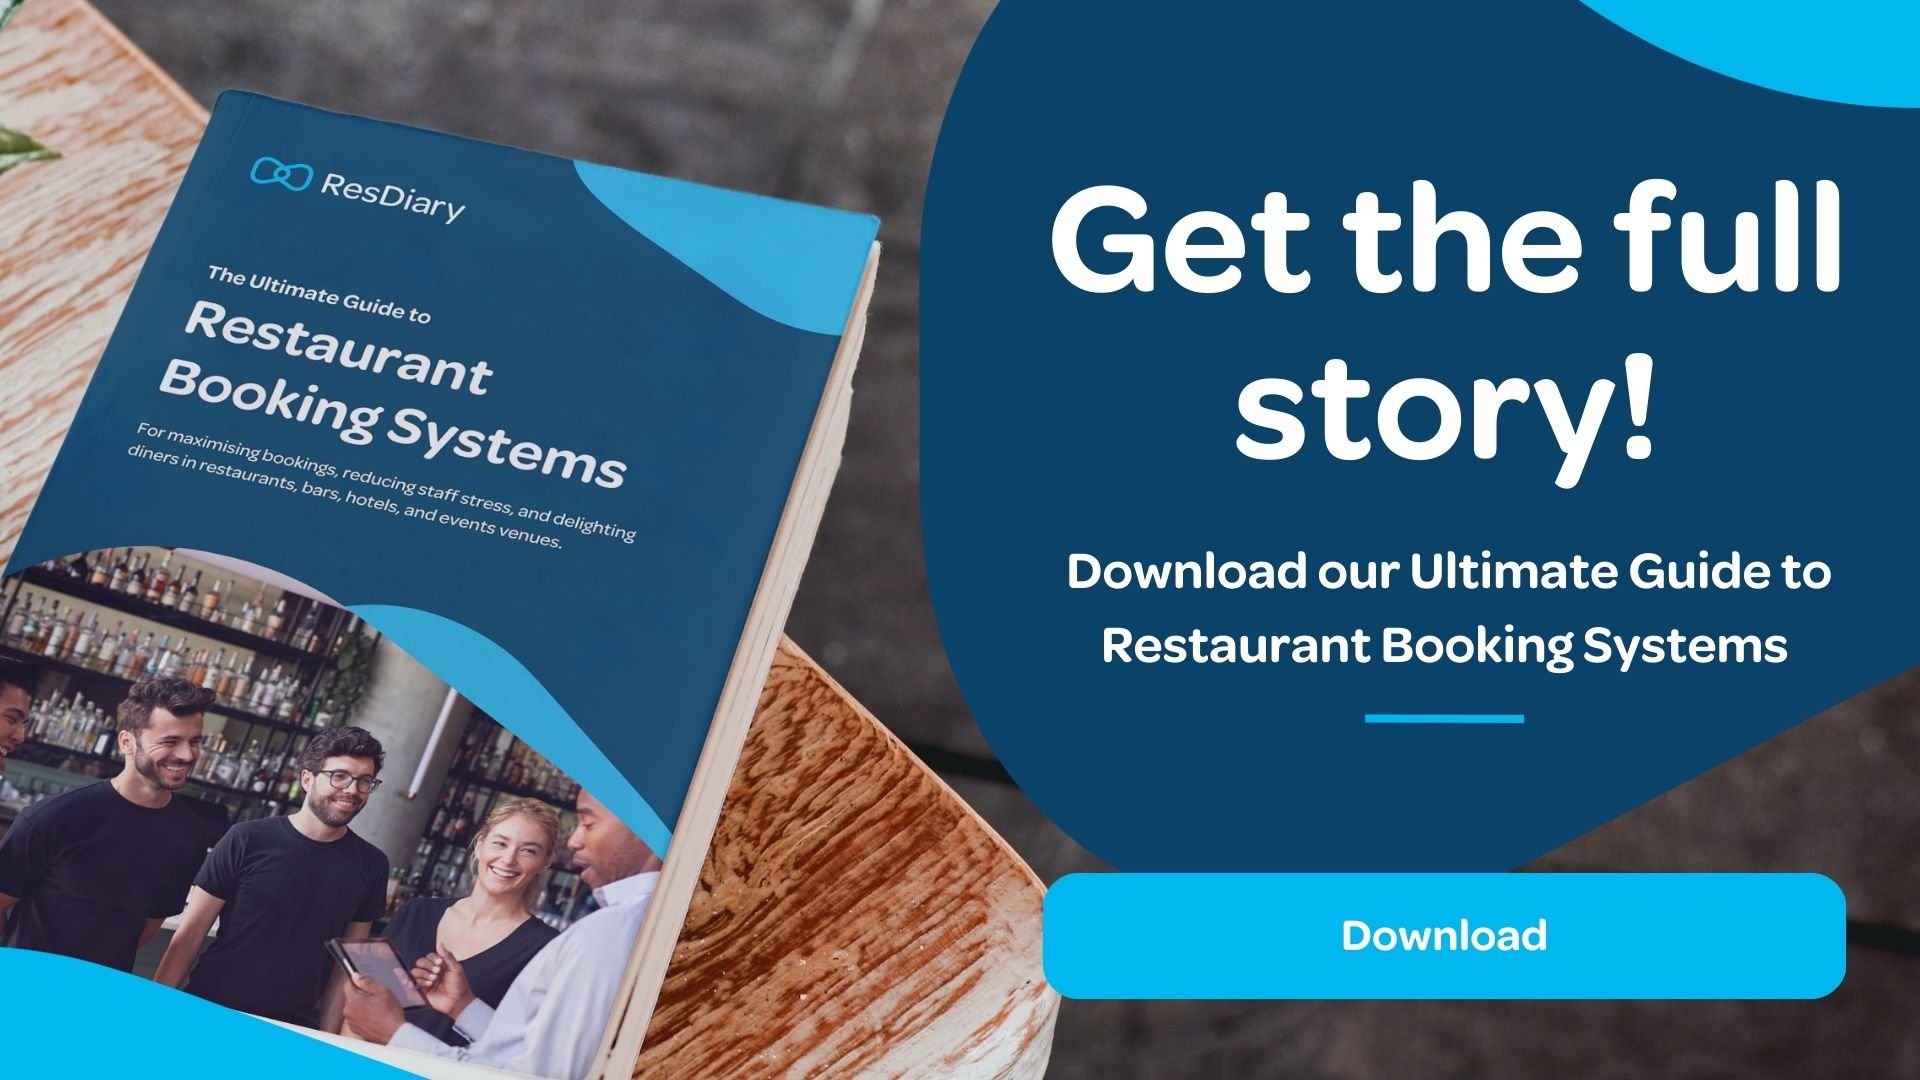 ResDiary Ultimate Guide to Restaurant Booking Systems - Download the full guide